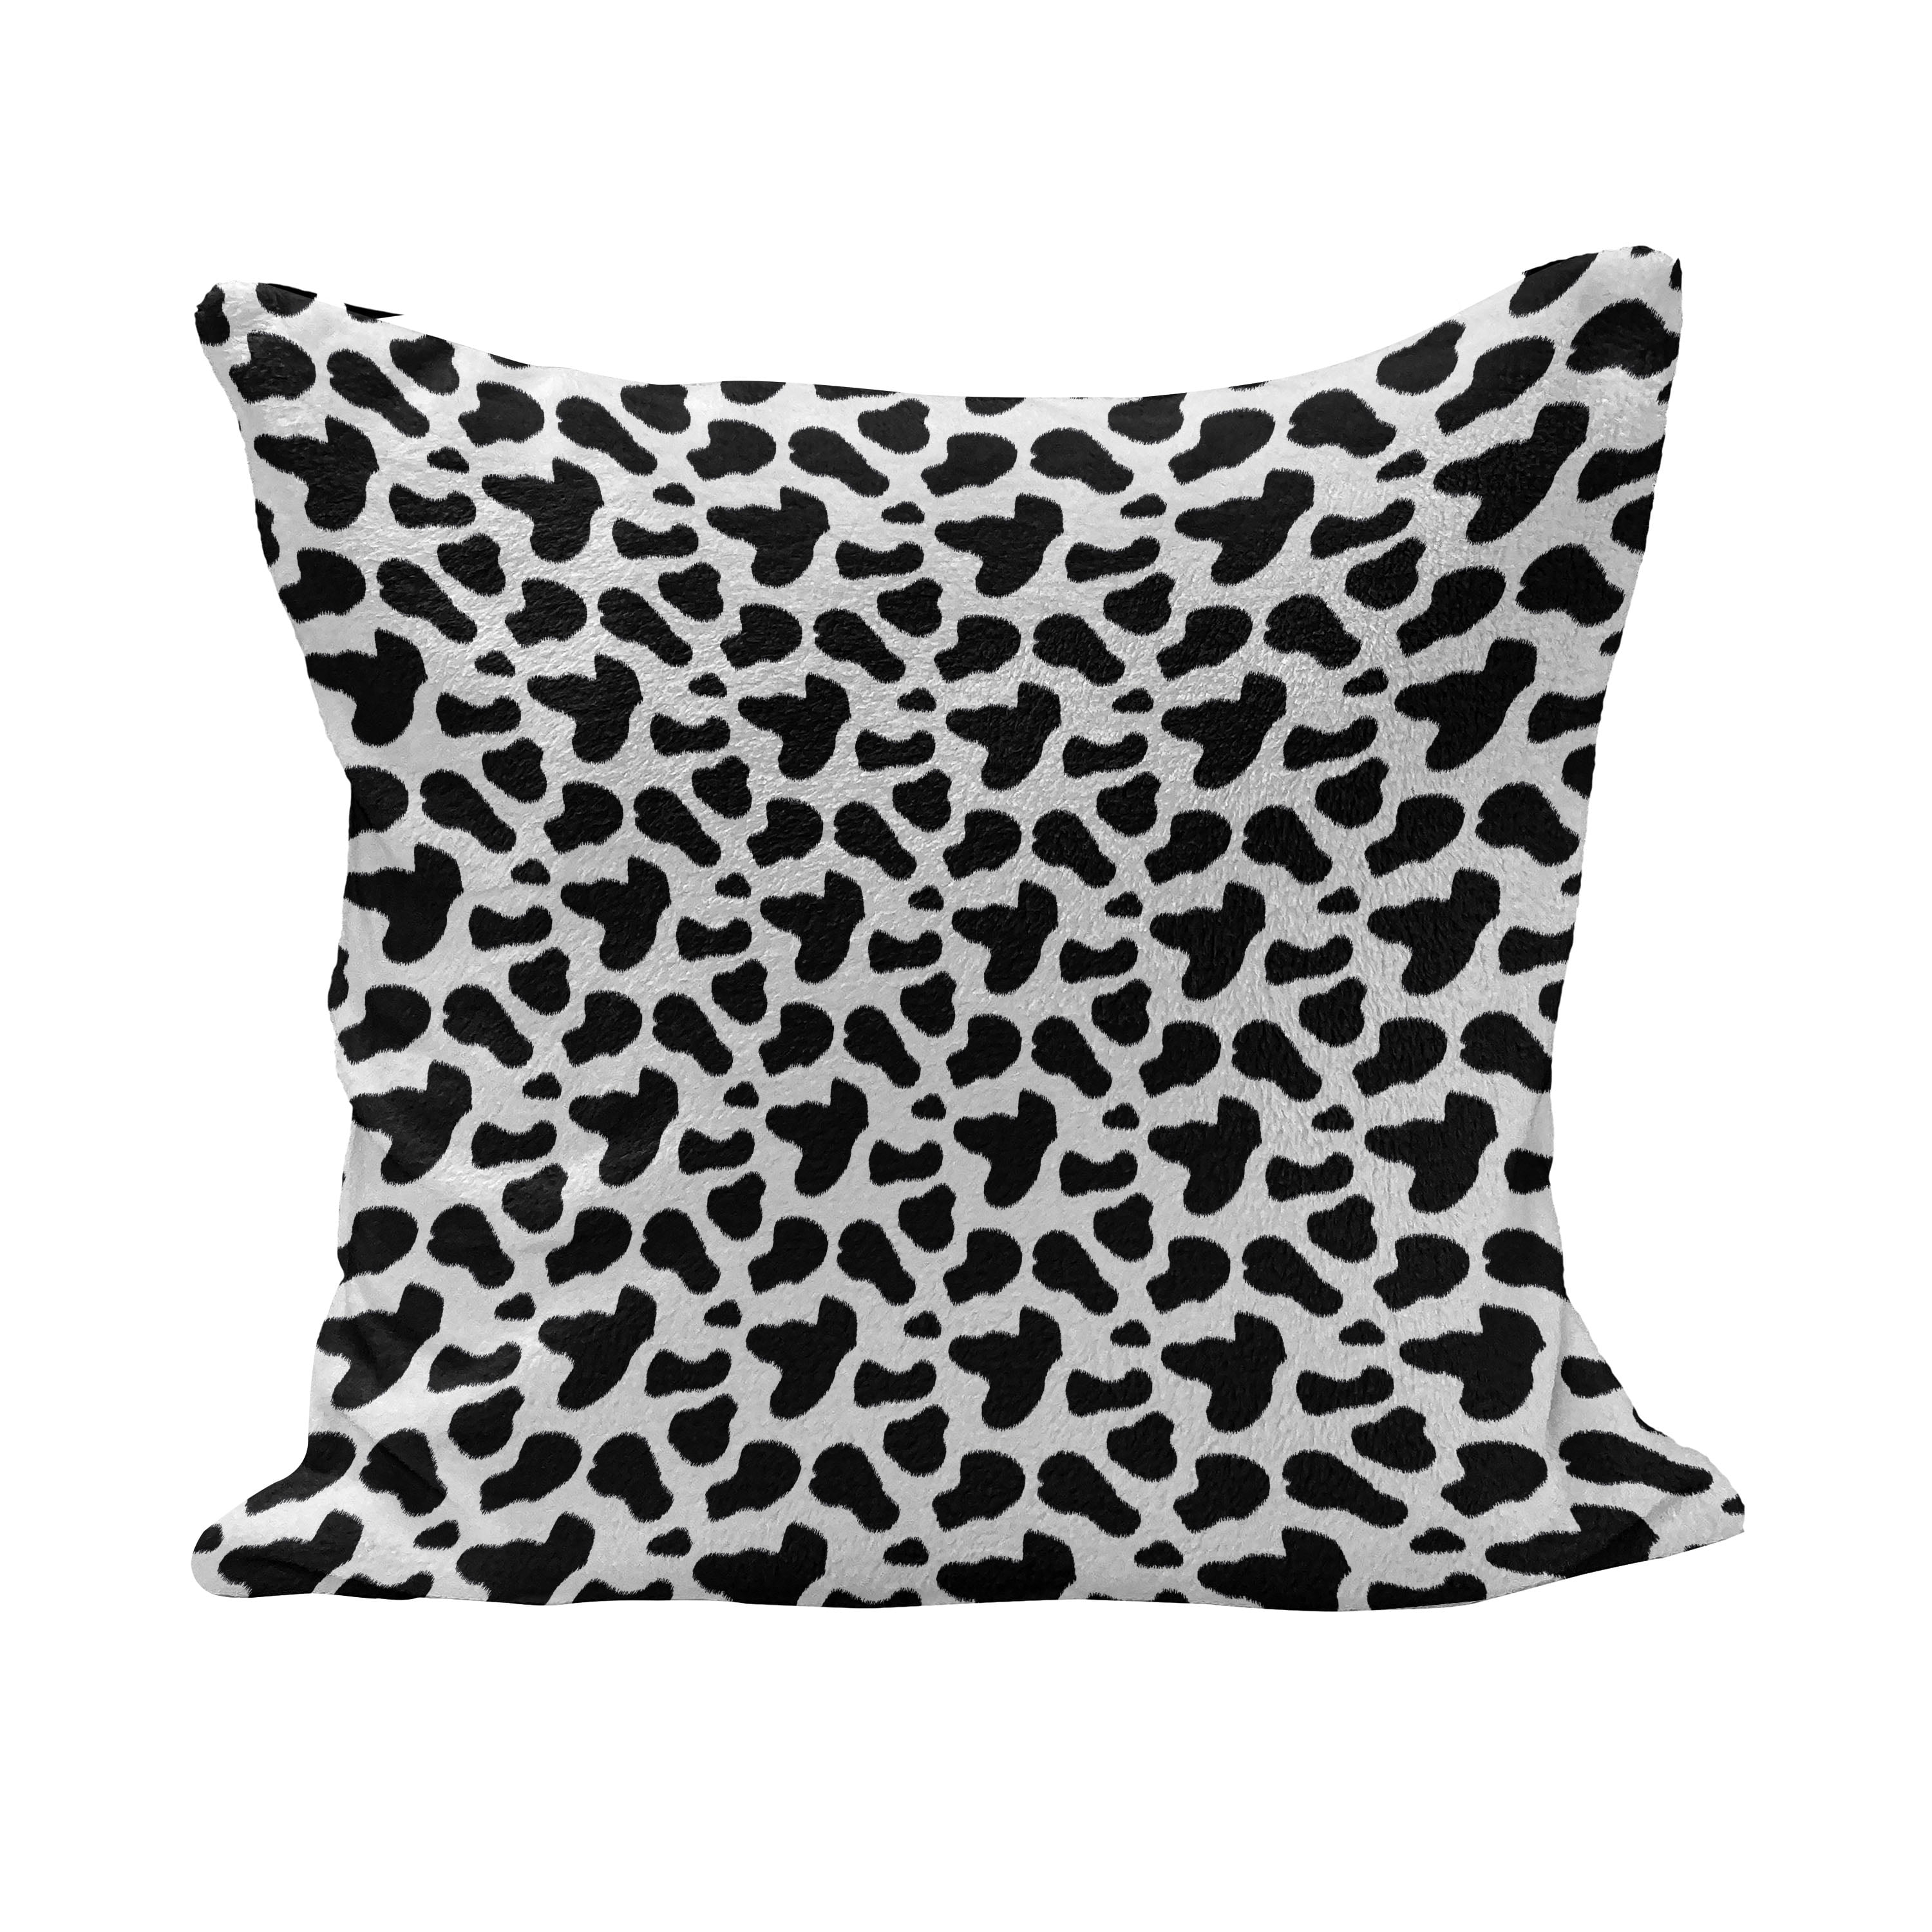 Square 18" Lovely Cow Pattern Cotton Linen Pillow Case Farm Wind Cushion Cover 